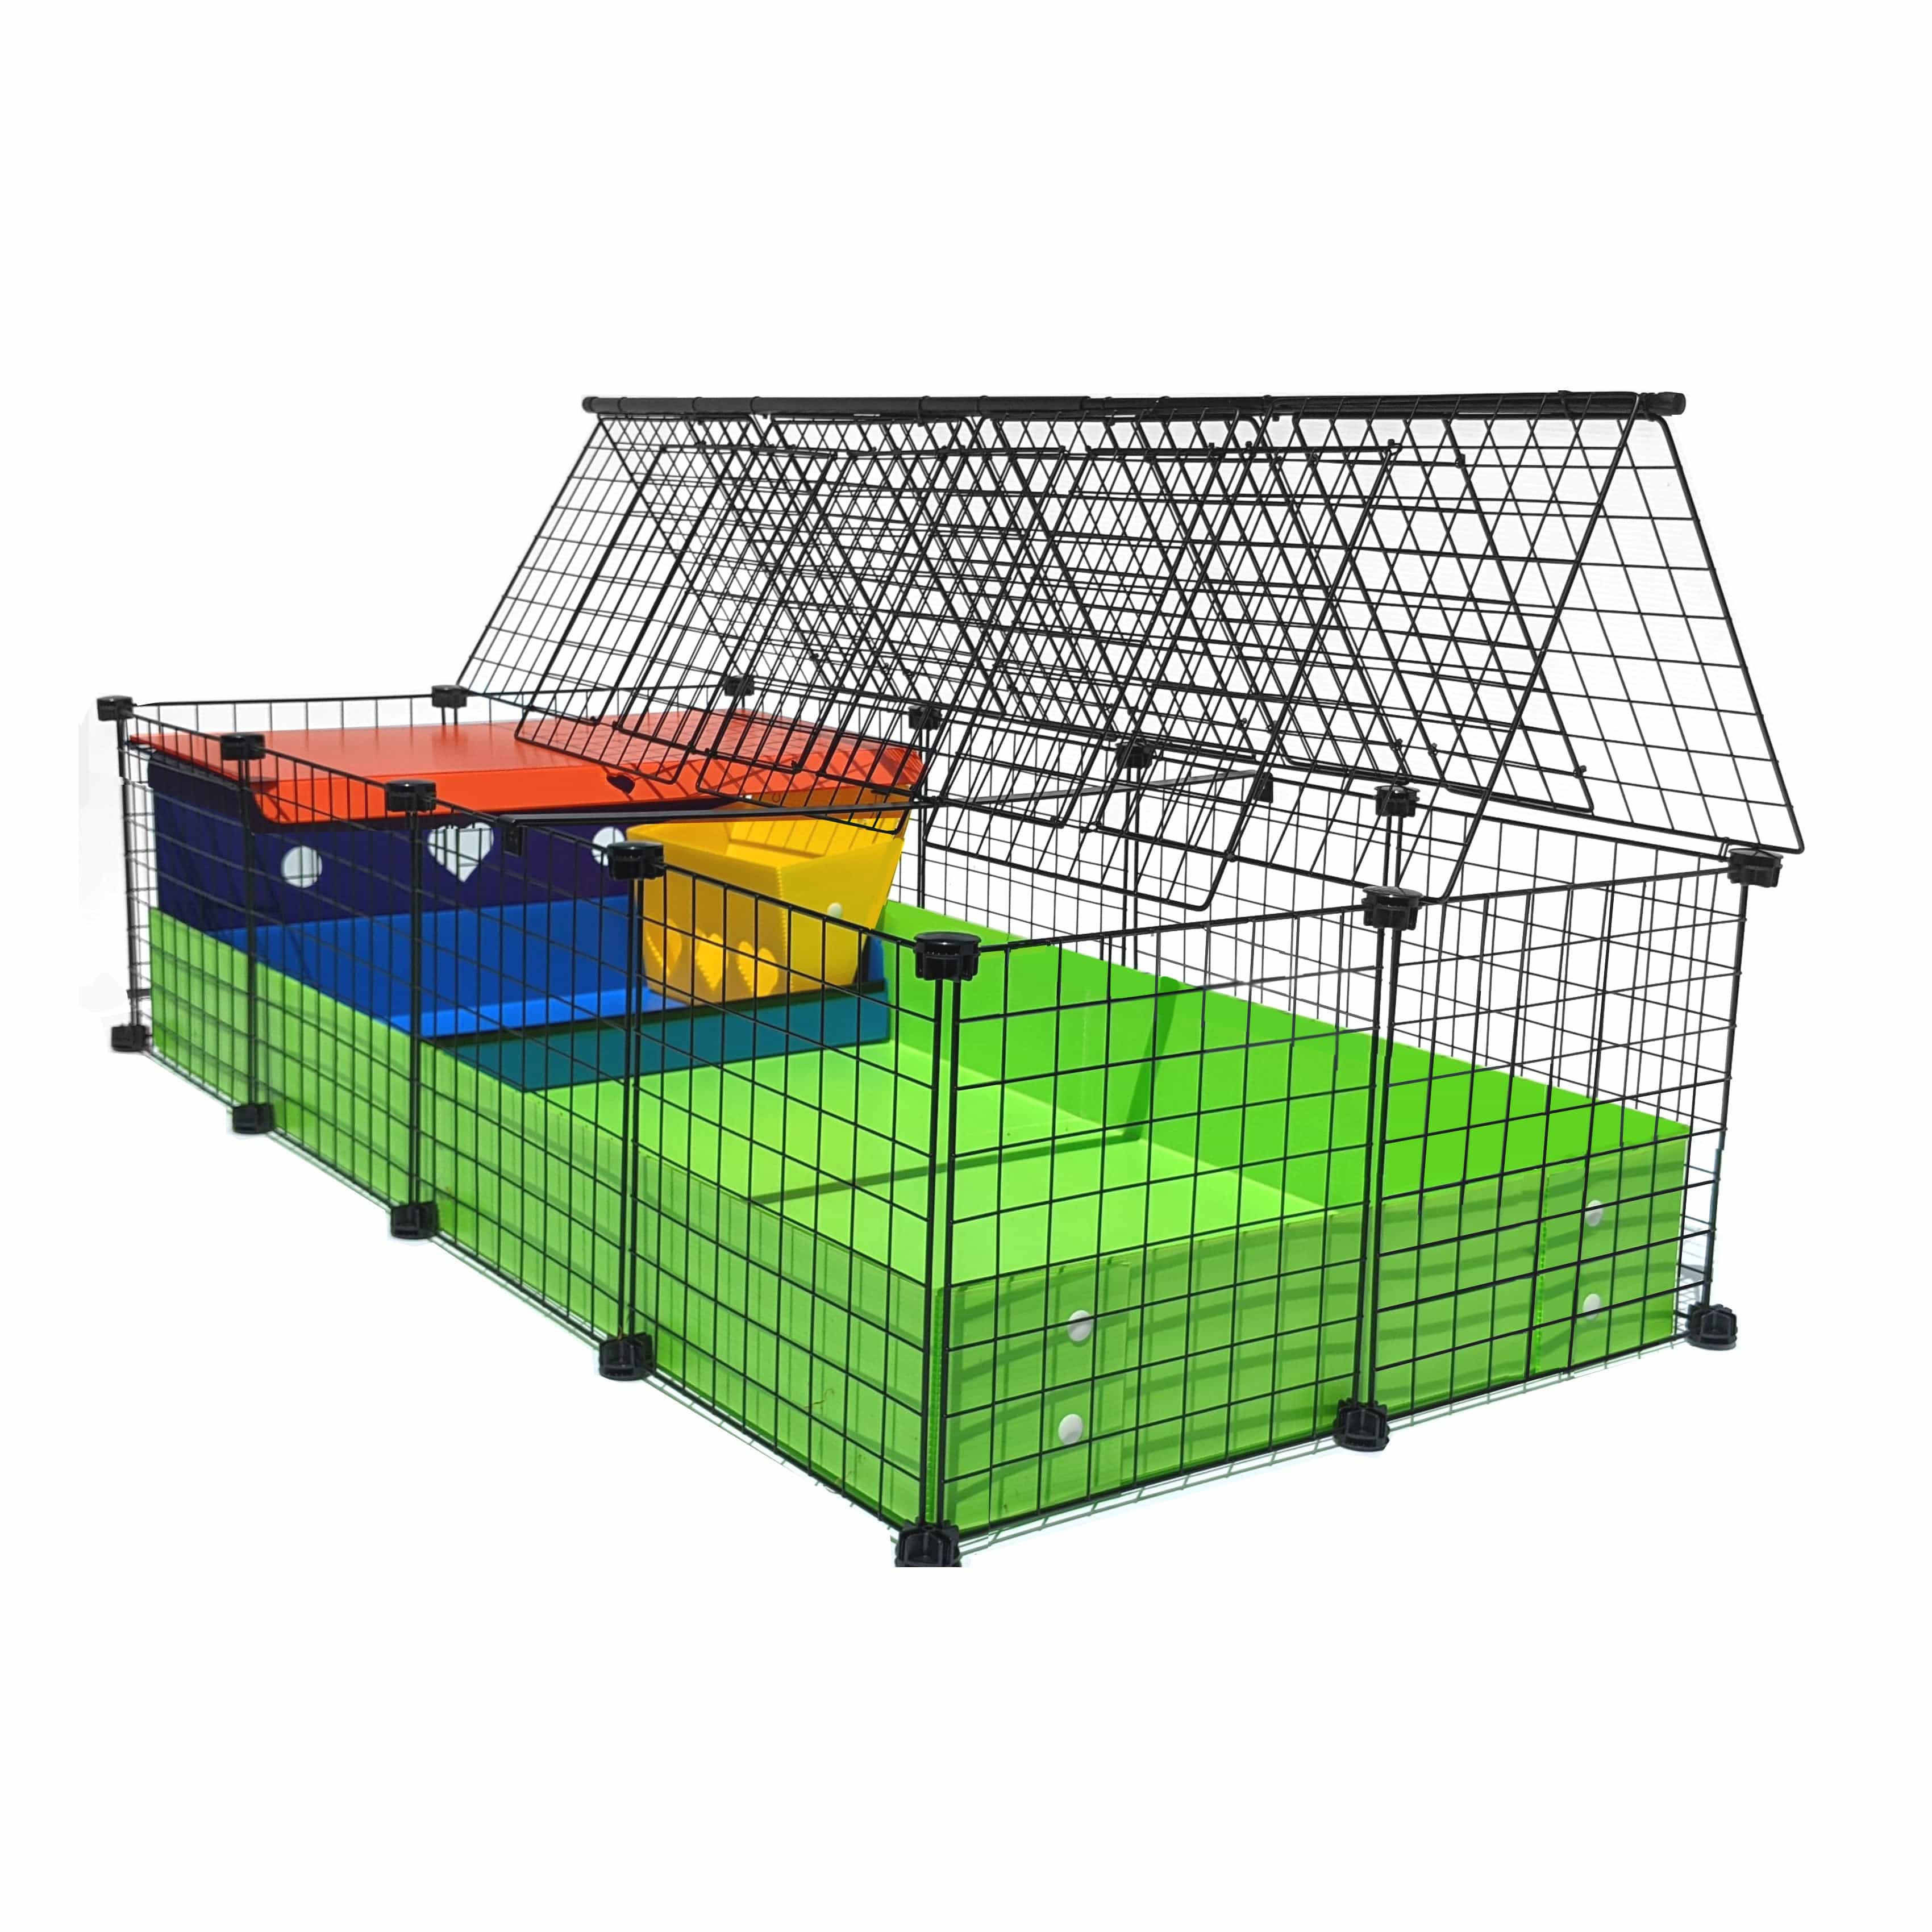 Covered starter kit with a lime C&C guinea pig cage and colorful kitchen suite